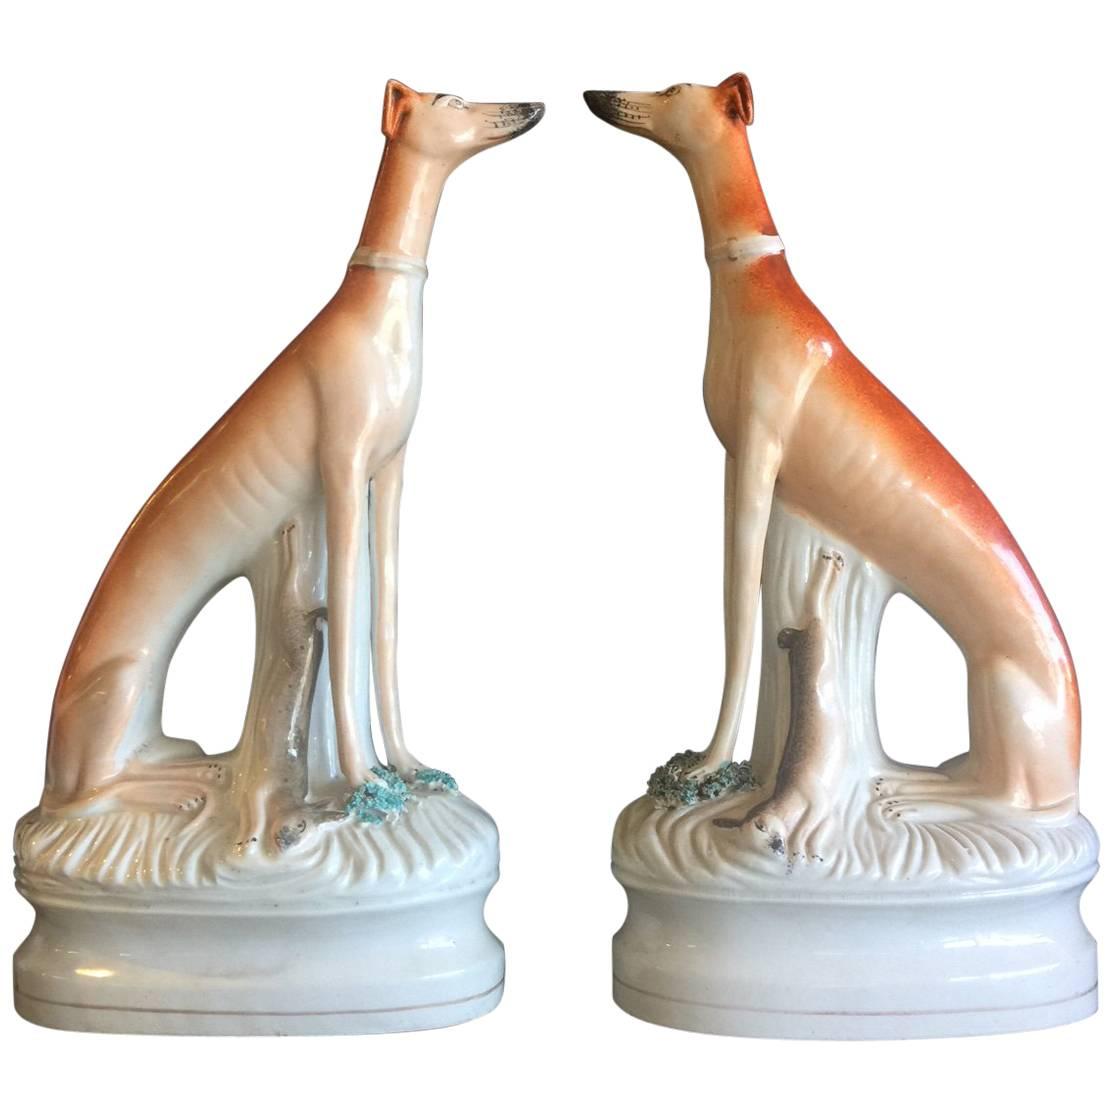 Pair of 19th Century Porcelain Greyhound/Whippet Figurines by Staffordshire